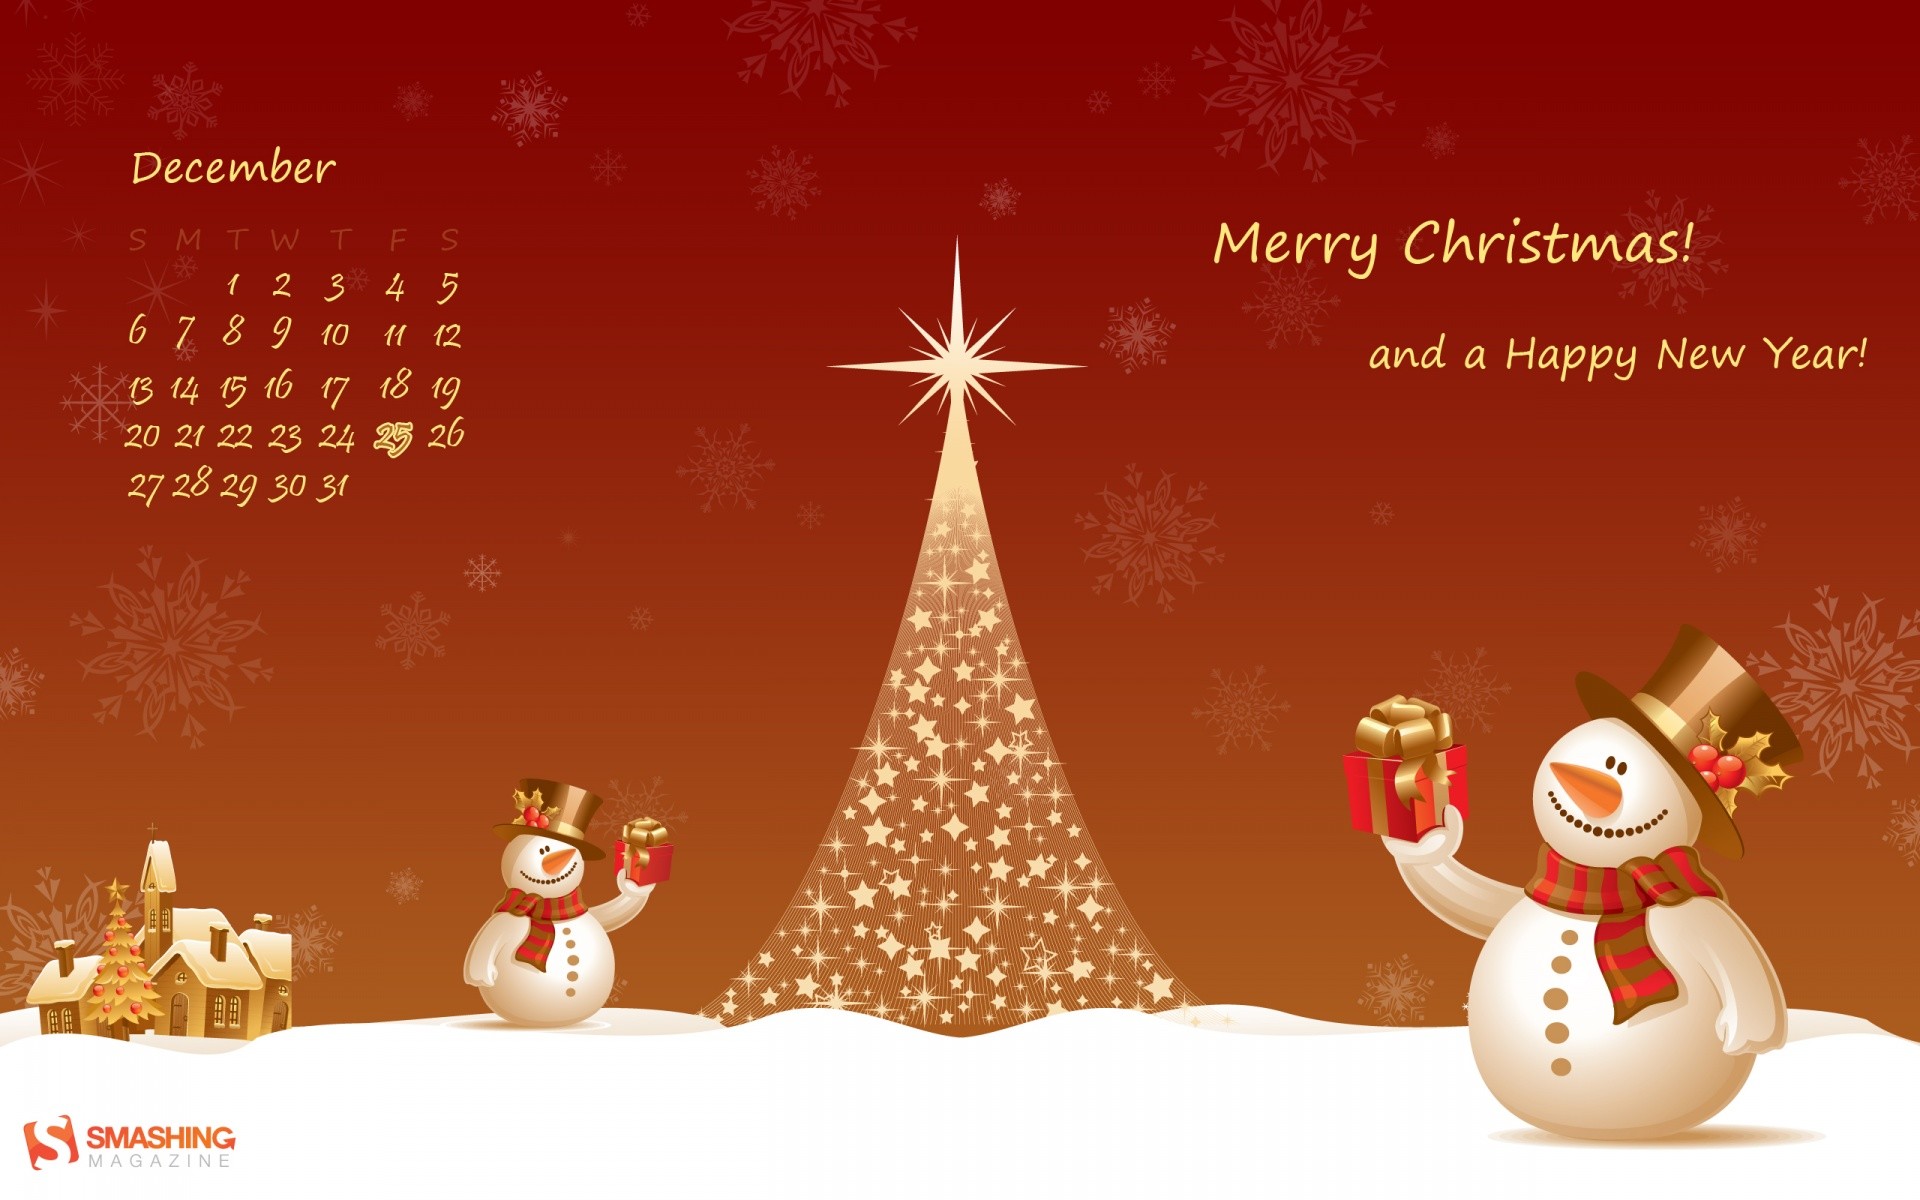 1920x1200 Christmas Wallpapers For Desktop - HD Wallpapers Backgrounds of .